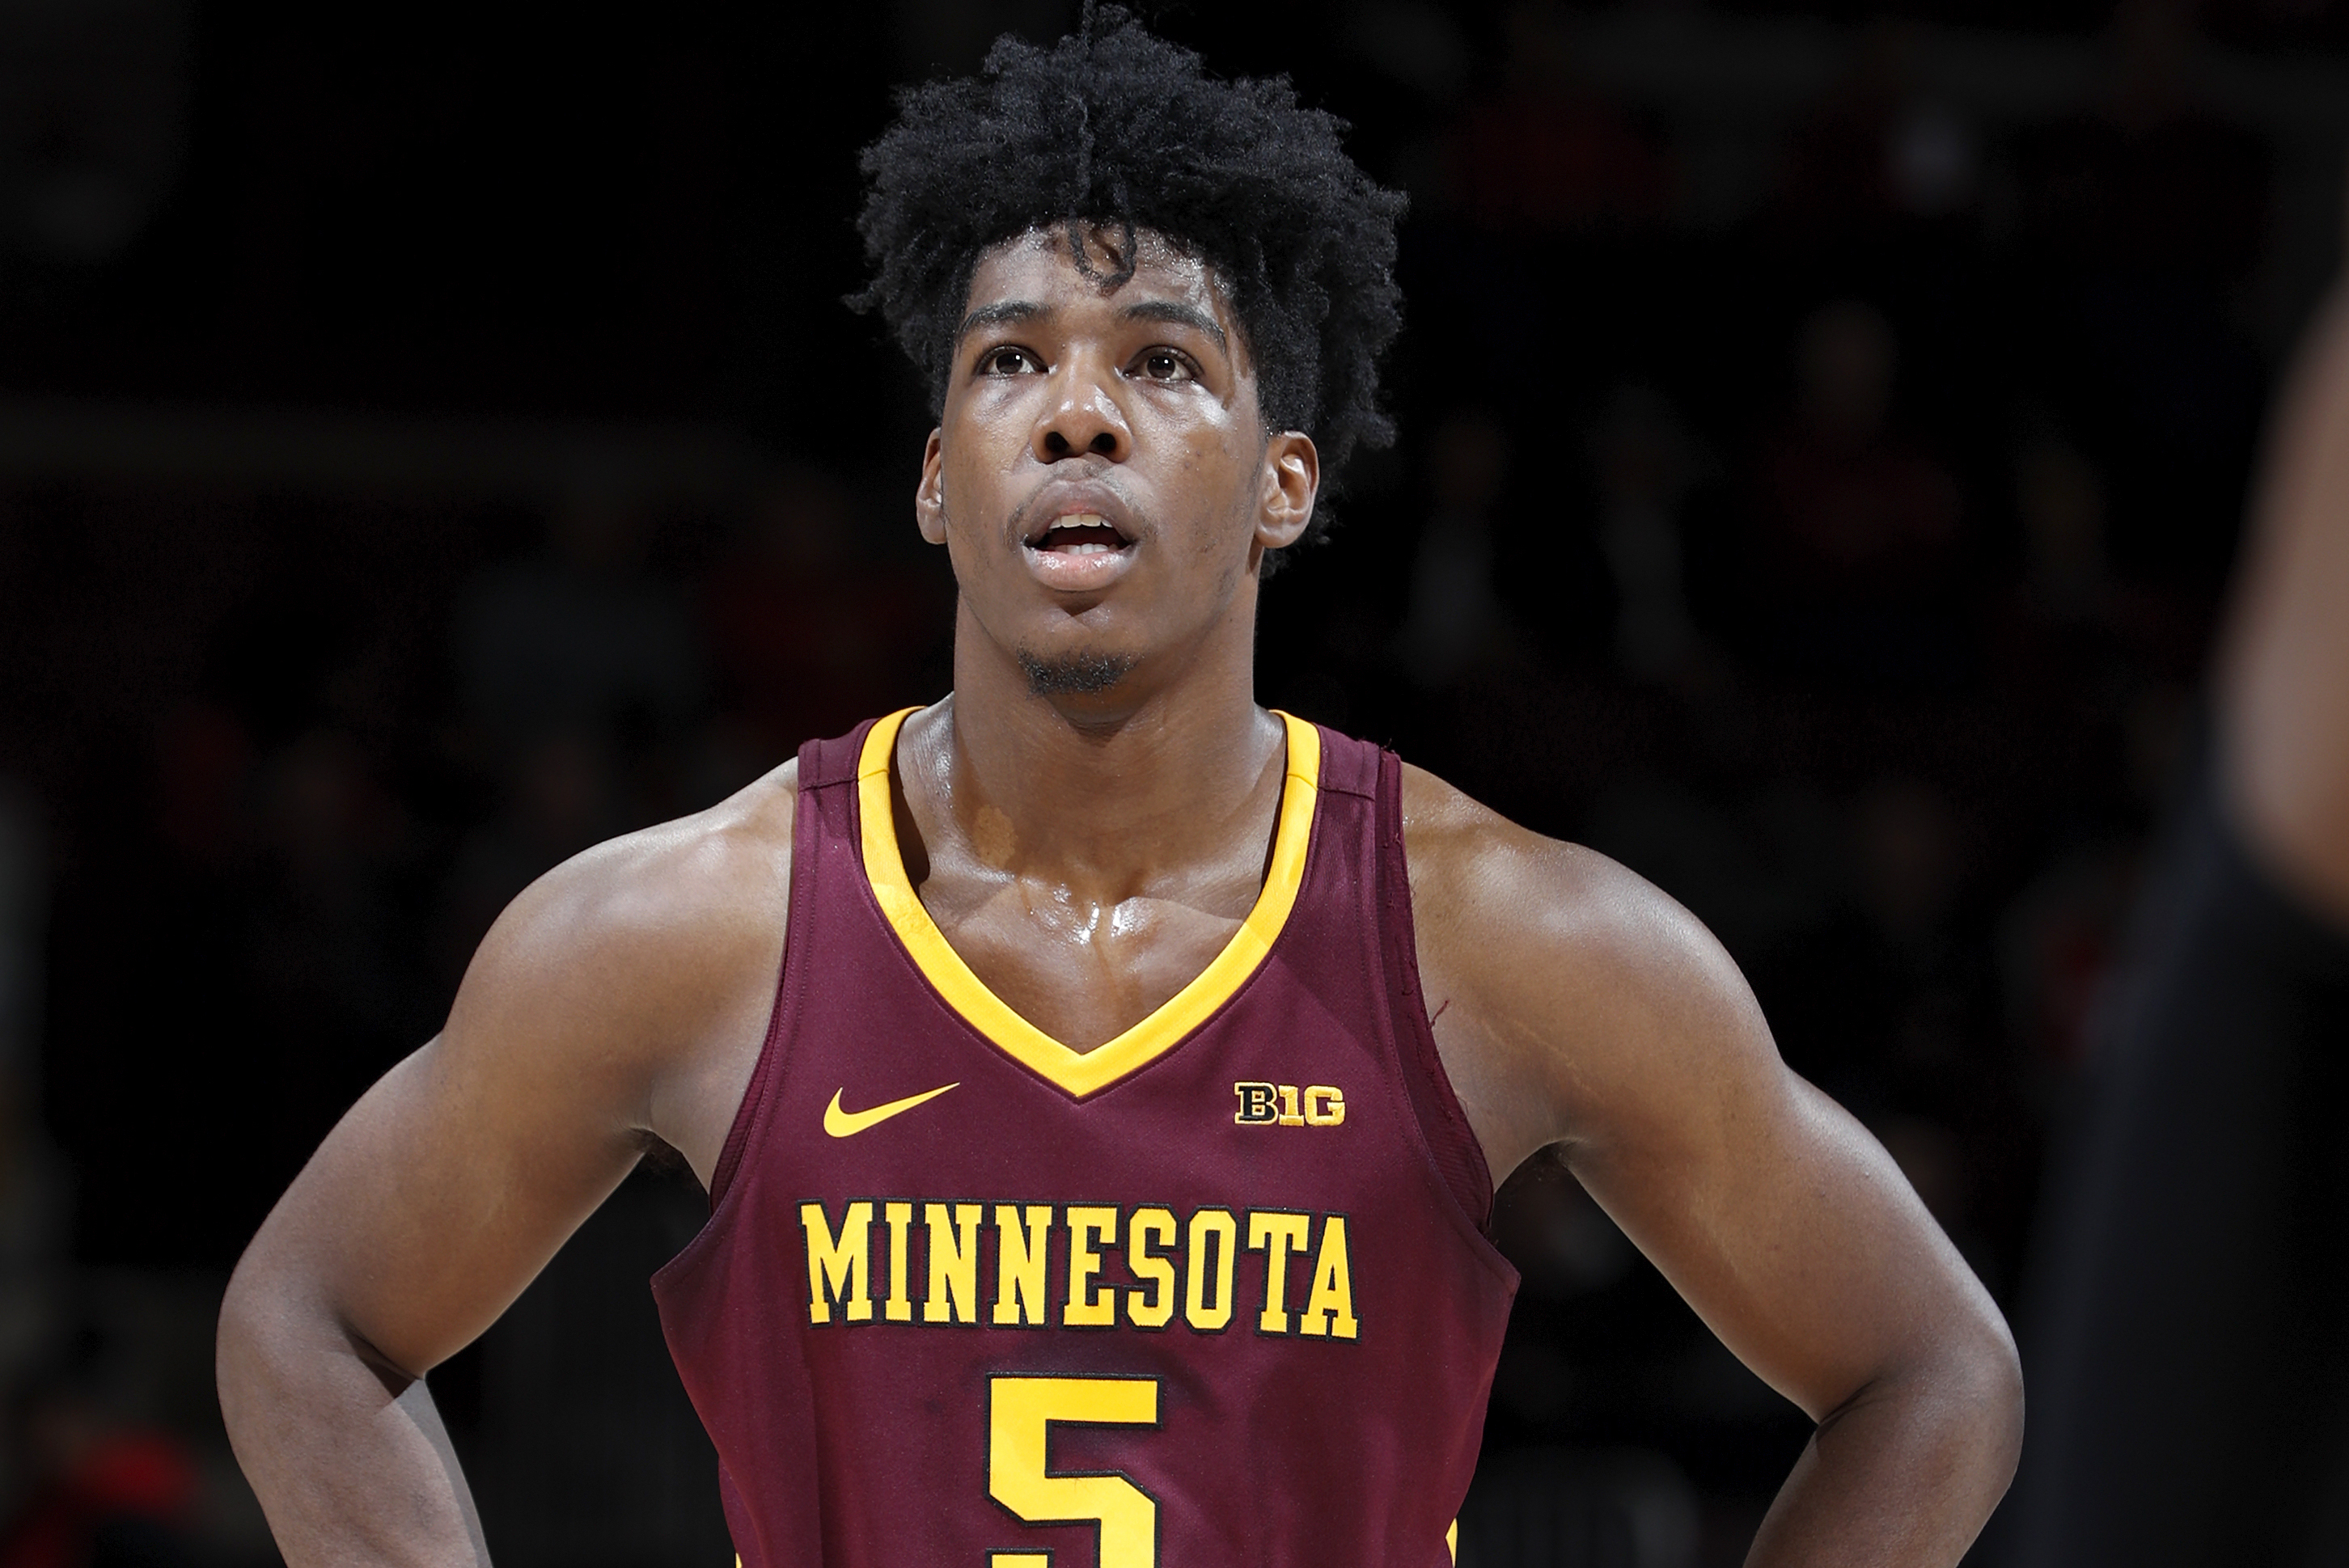 Minnesota's Marcus Carr Declares for 2020 NBA Draft, Will Not Hire Agent | Bleacher Report | Latest News, Videos and Highlights